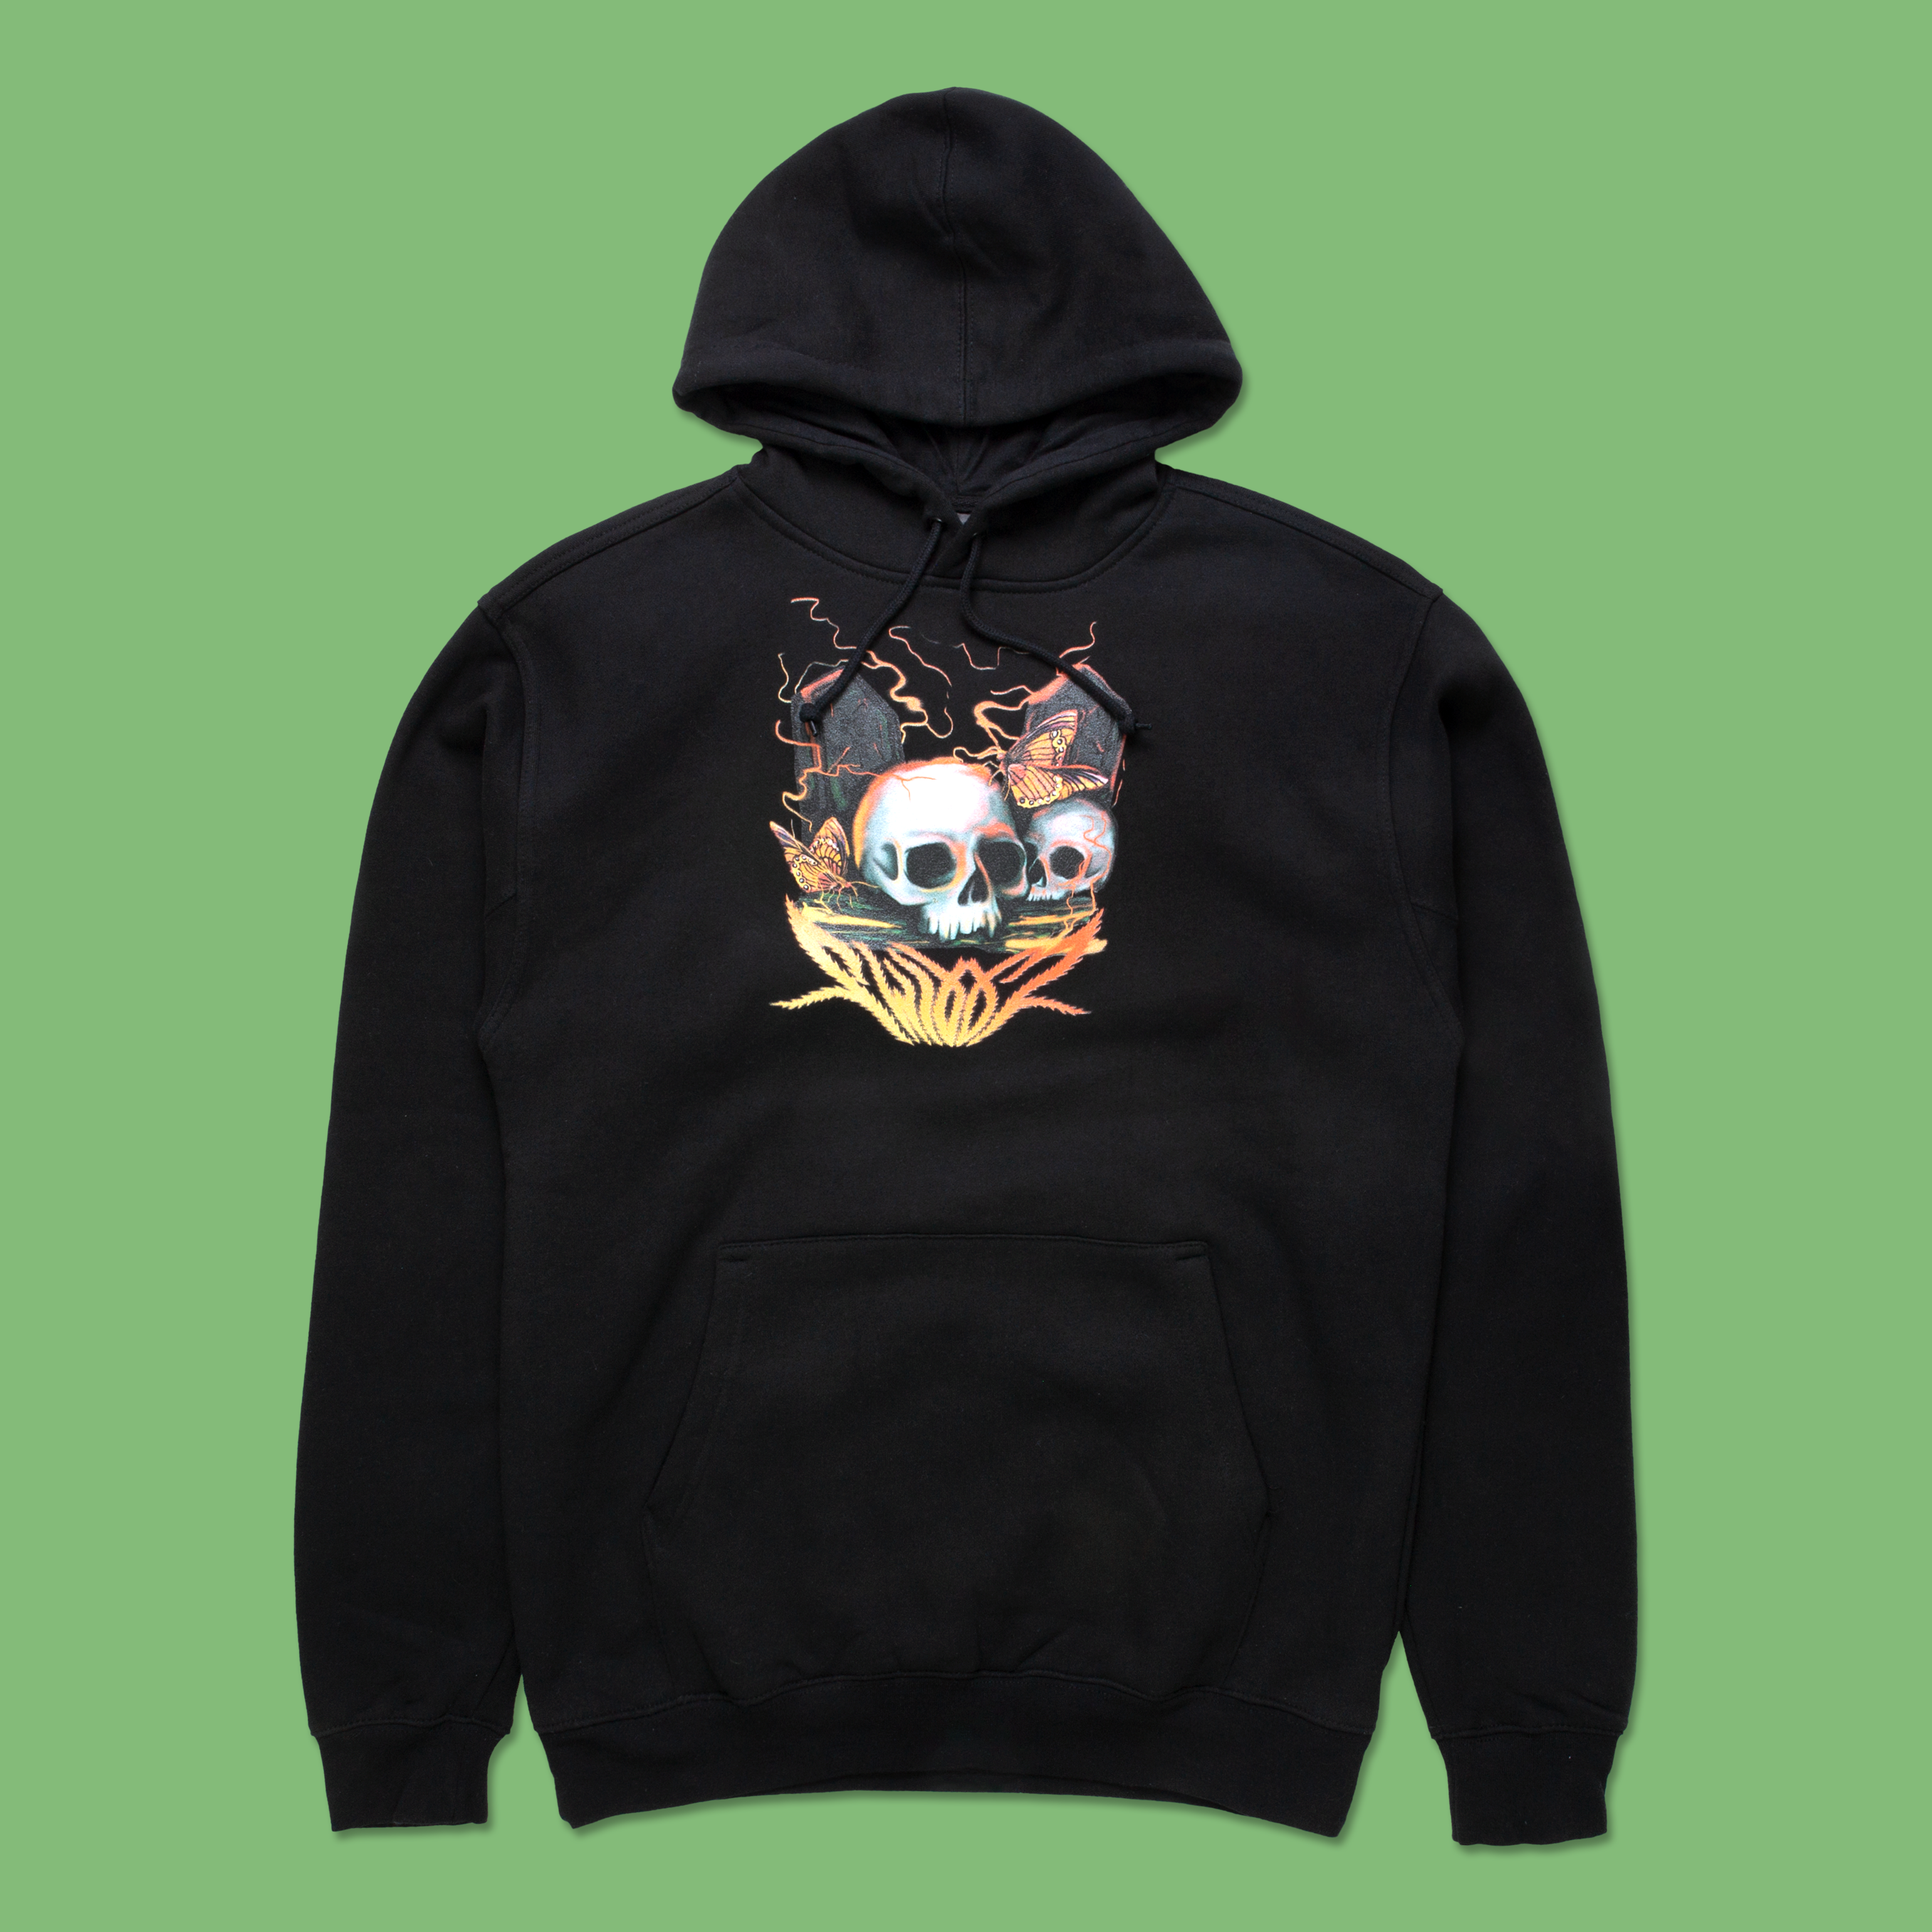 Deathly Place Hoodie from SWIXXZ by Maggie Lindemann